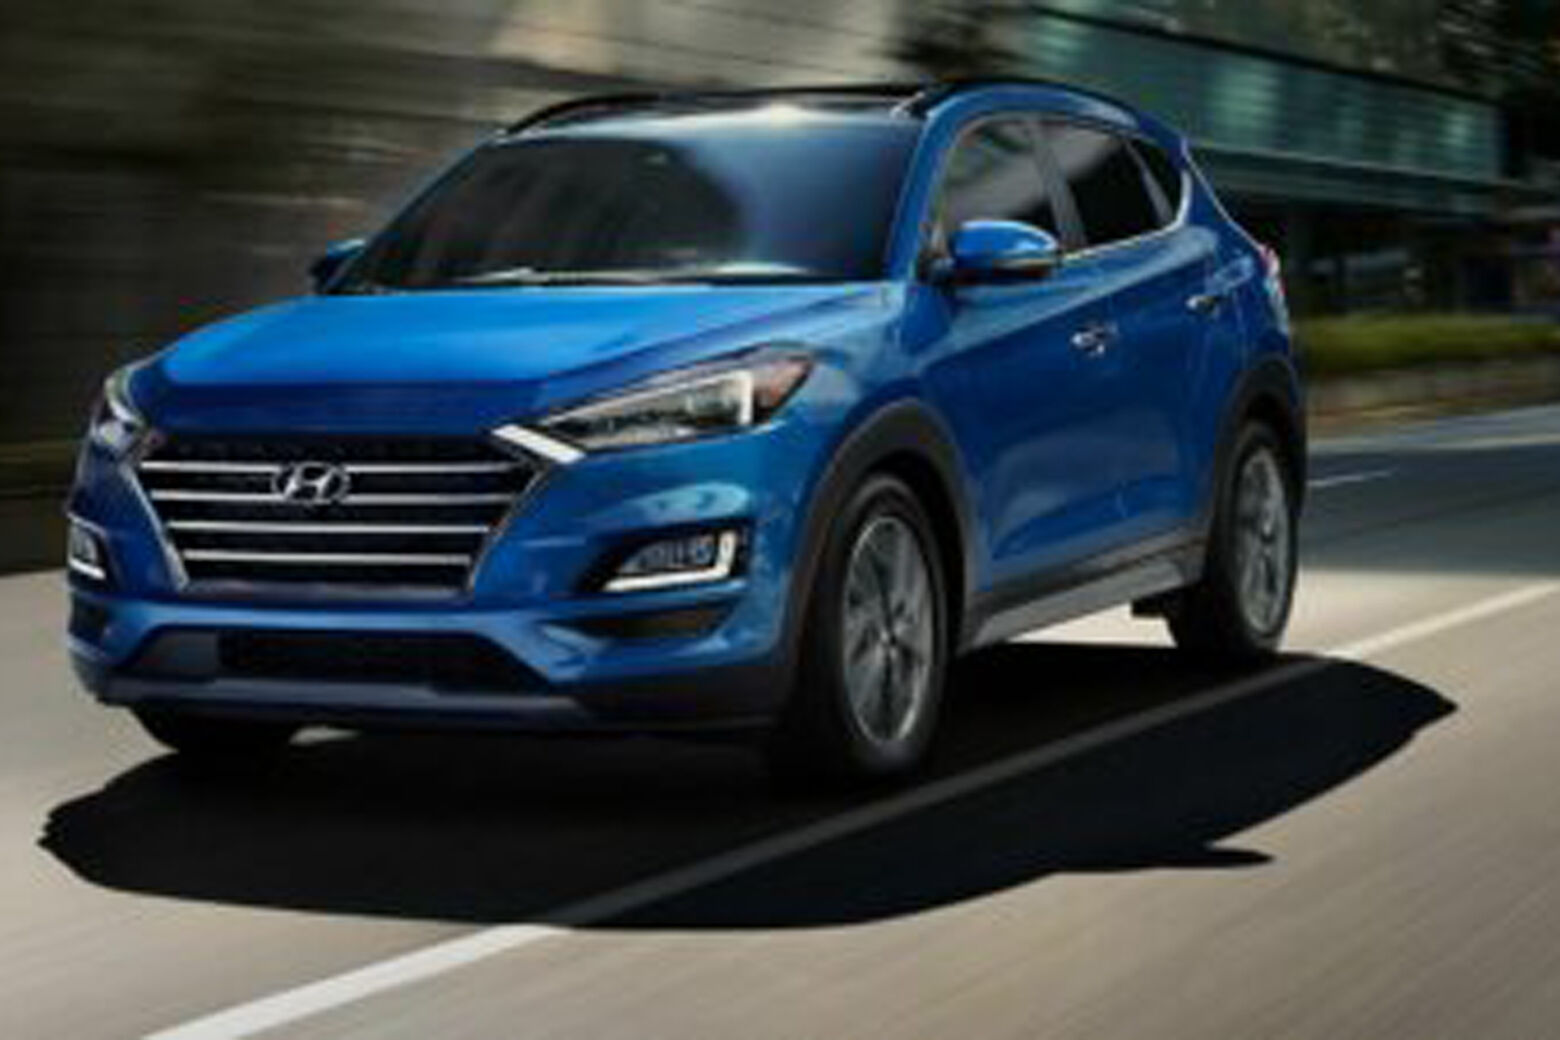 <h3><strong>2020 Hyundai Tucson</strong></h3>
<p><strong>Purchase Deal: </strong>0% financing for up to 84 months plus first payment deferred for 90 days</p>
